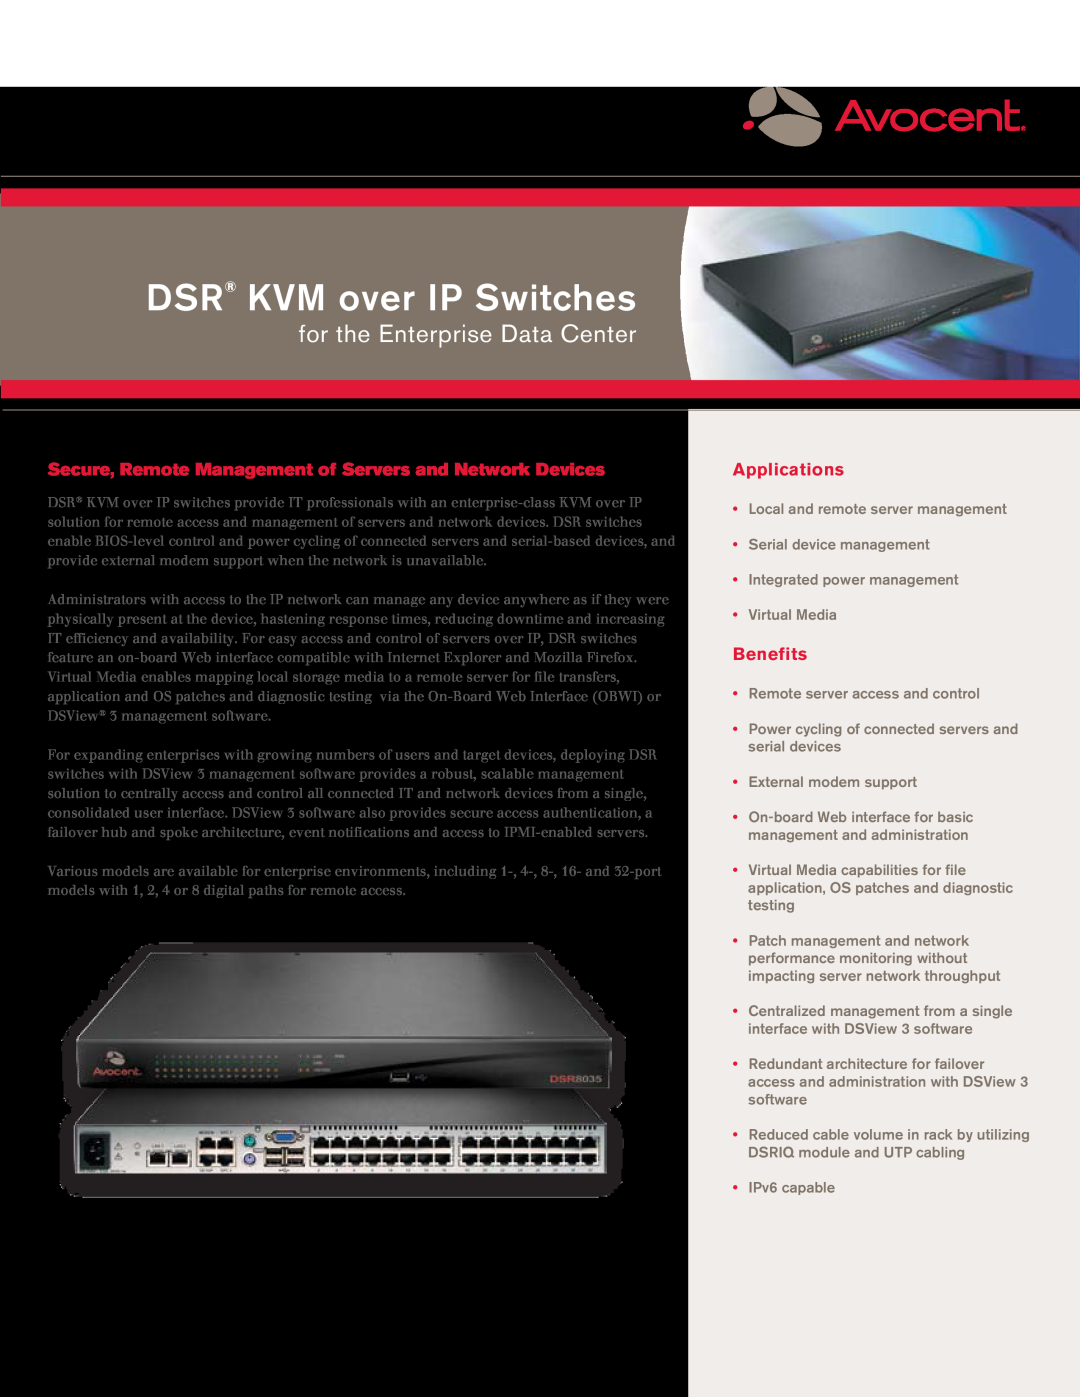 Avocent DSR KVM over IP Switch manual Secure, Remote Management of Servers and Network Devices, Applications, Benefits 